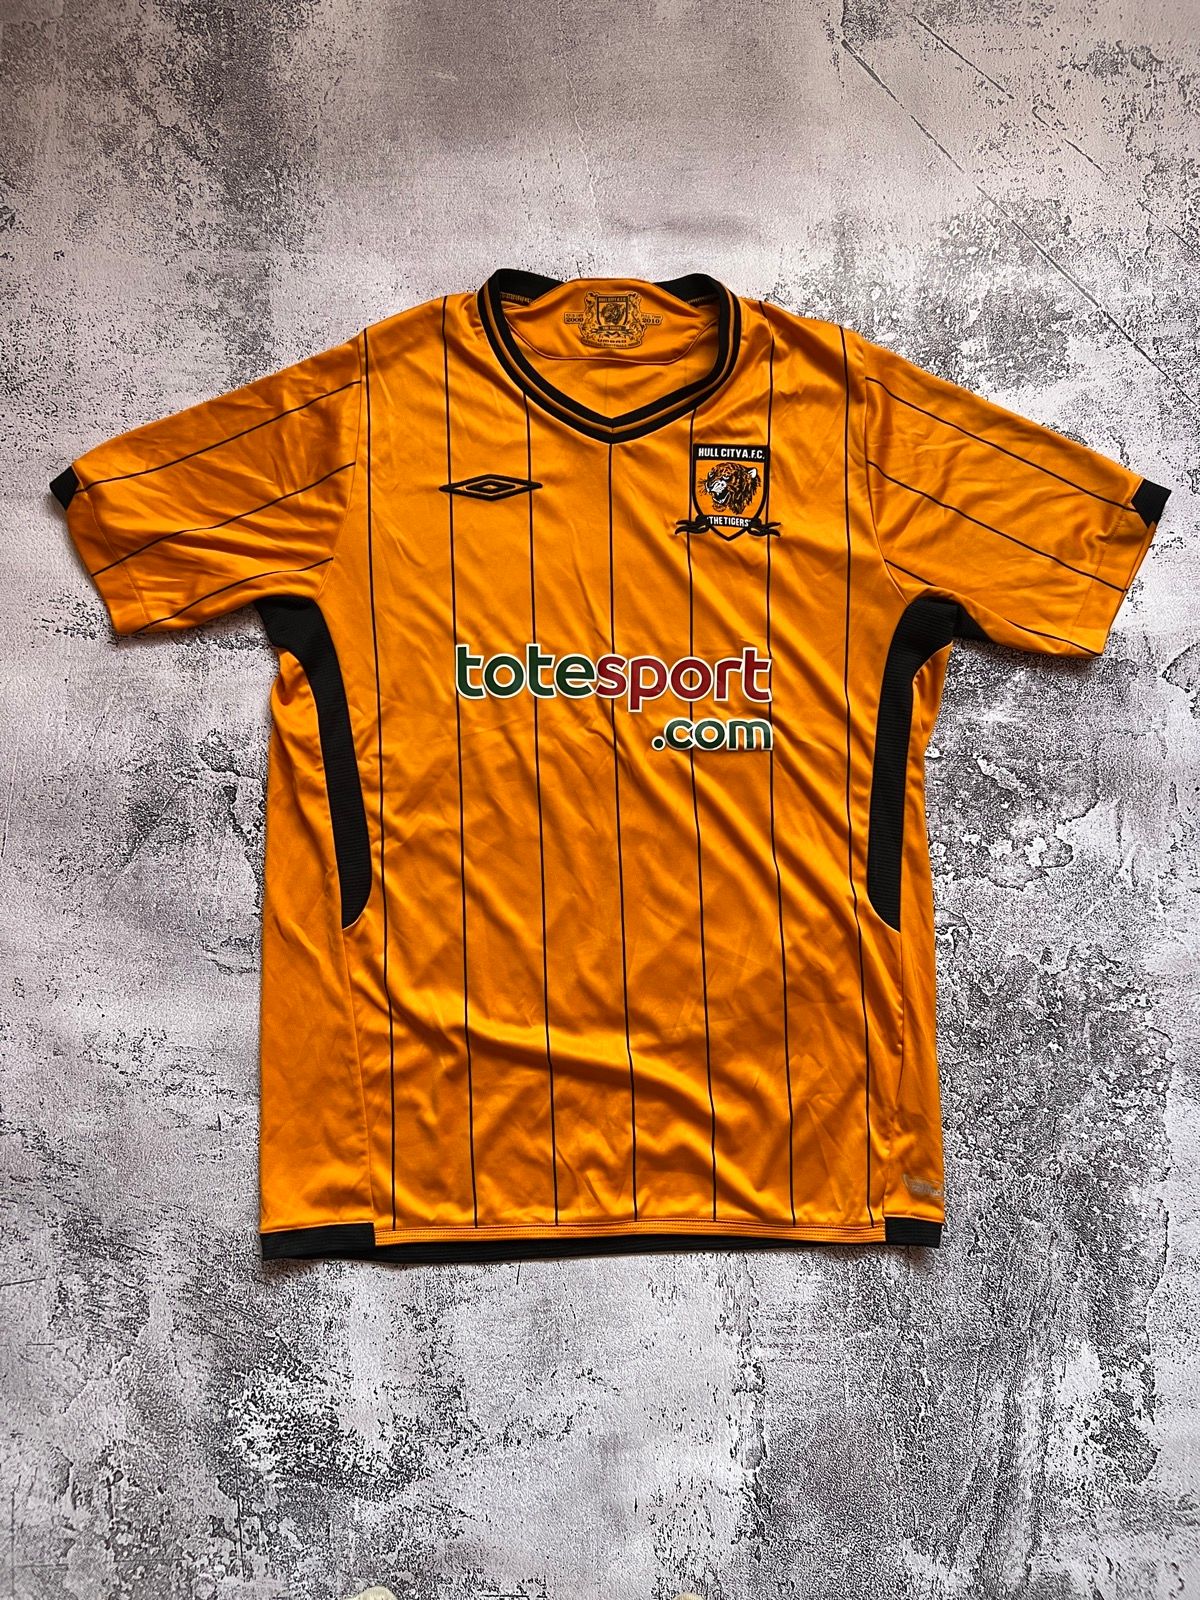 Pre-owned Soccer Jersey X Umbro Hull City 2009 Home Vintage Soccer Jersey Football Kit In Orange